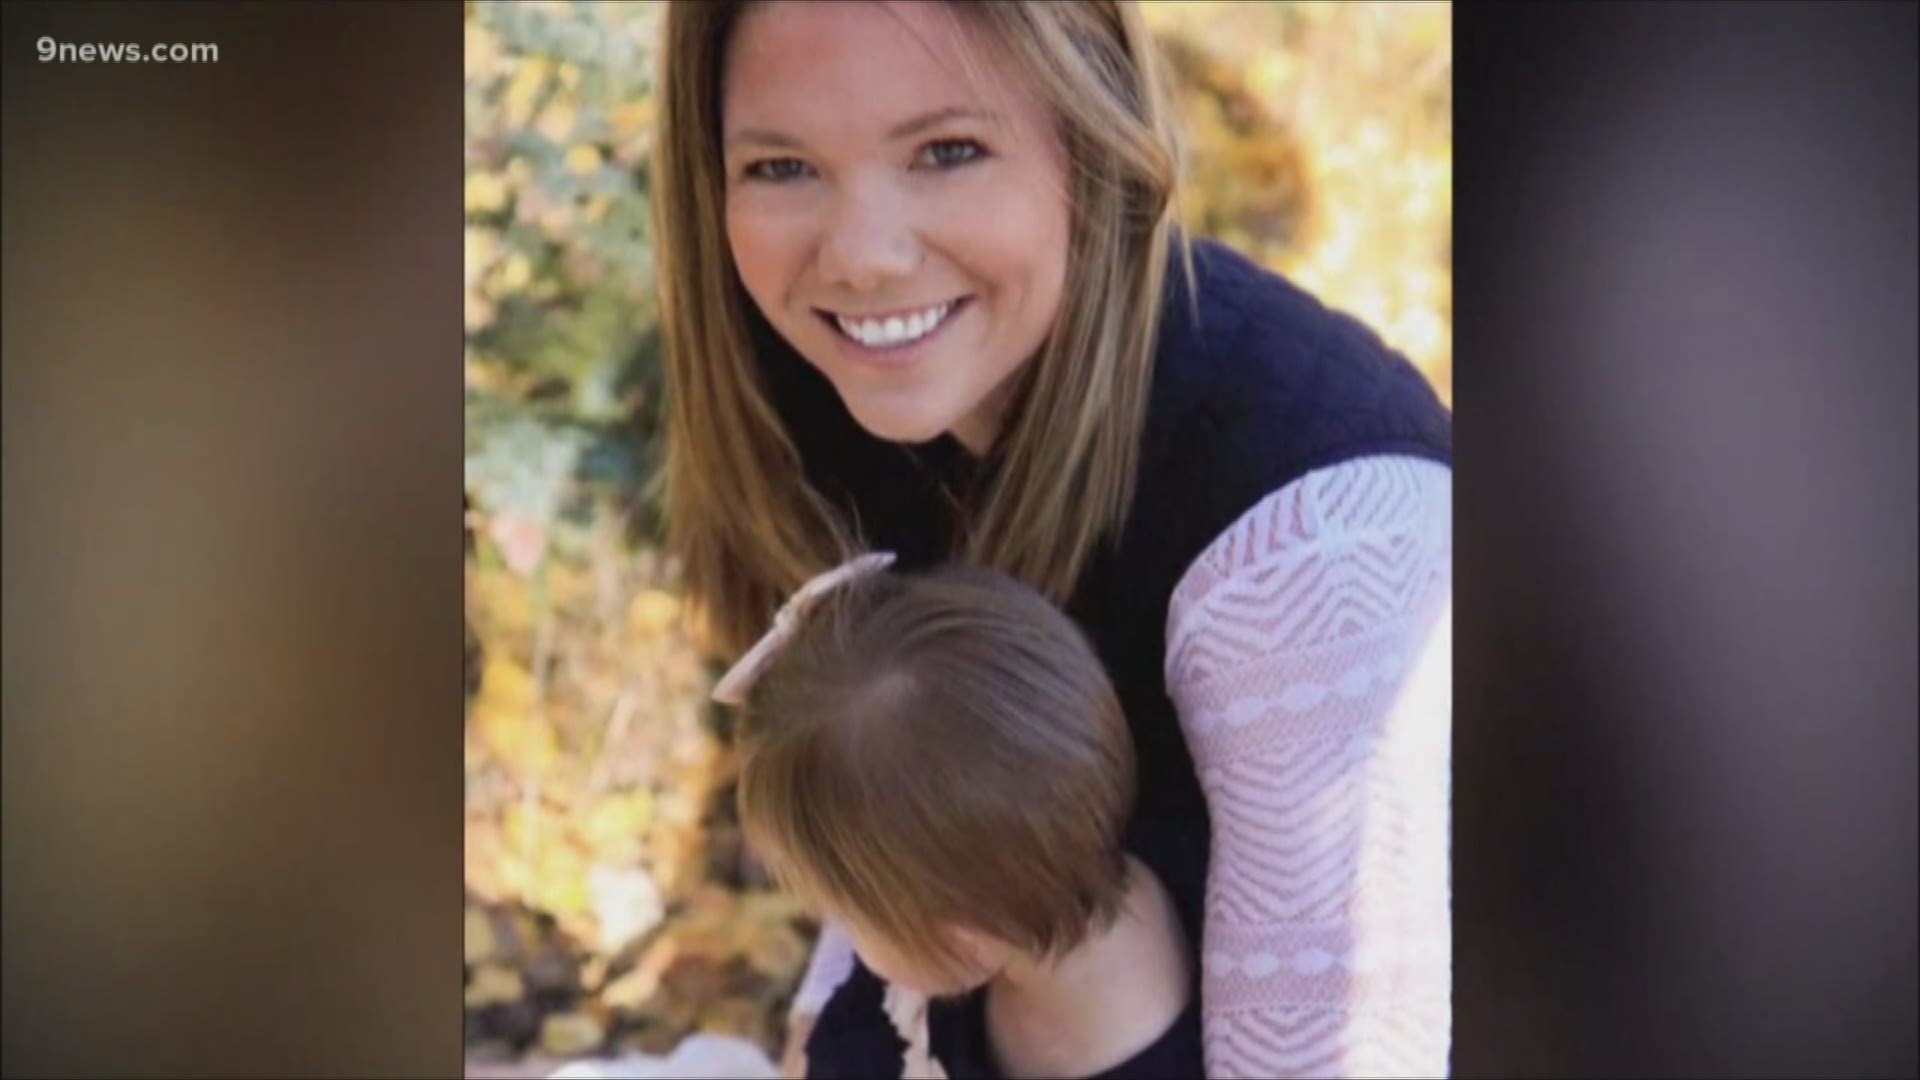 Jury selection is underway for the trial of Patrick Frazee, who is accused in the murder of his fiancee, missing Woodland Park mom Kelsey Berreth.